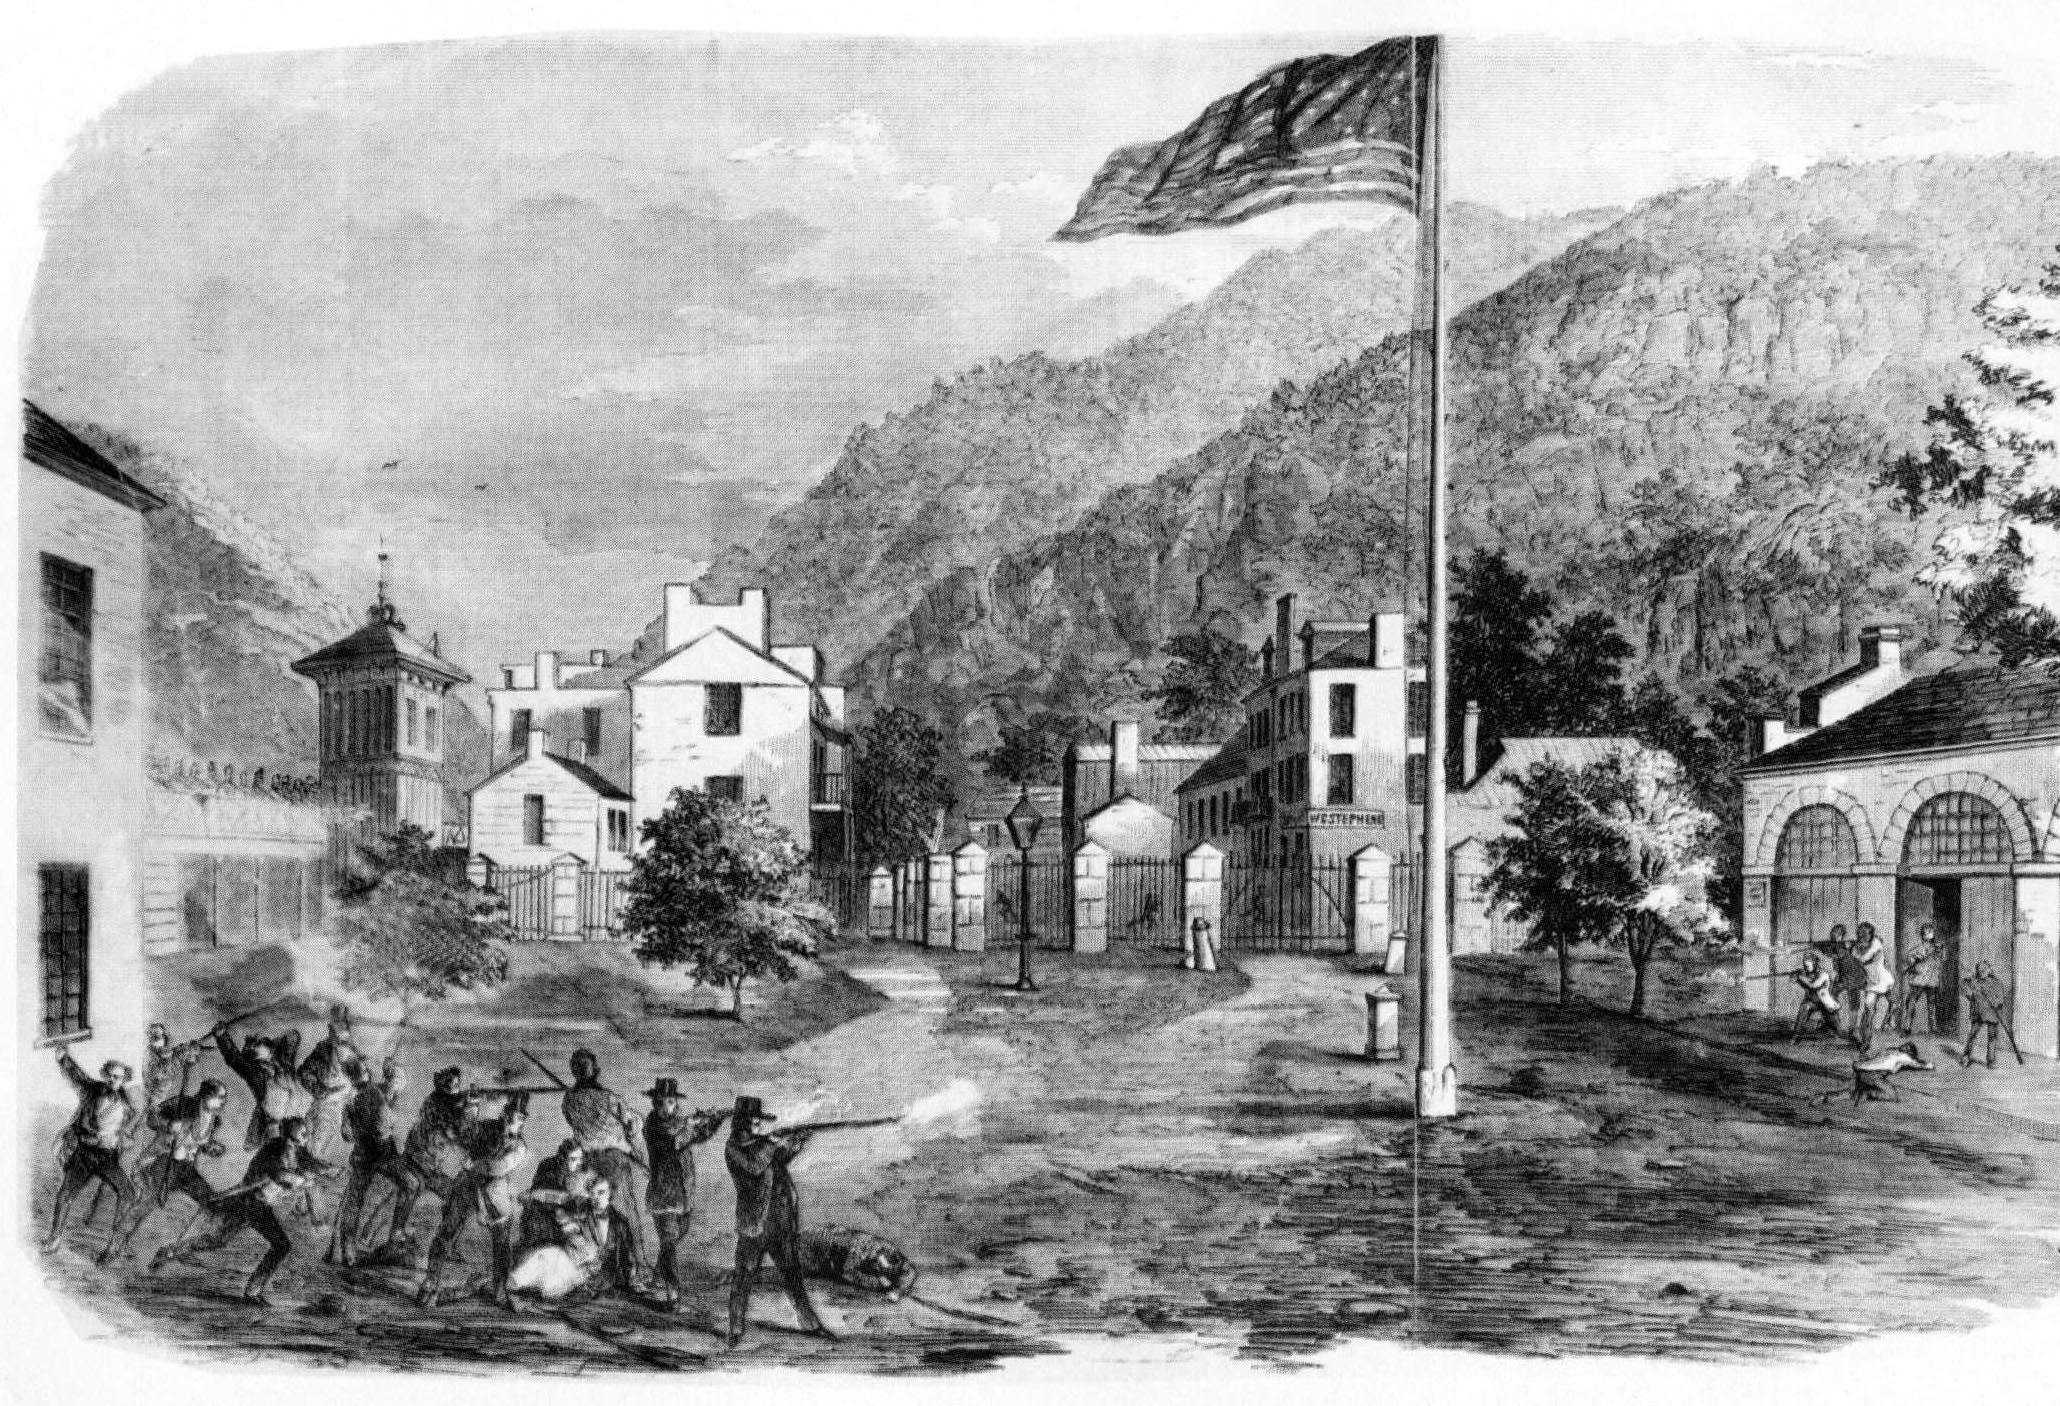 In October 1859, Secretary of War John B. Floyd ordered Lee to Harper’s Ferry, West Virginia (above), with several companies of artillery and a detachment of marines to quell a bloody insurrection masterminded by abolitionist John Brown. 